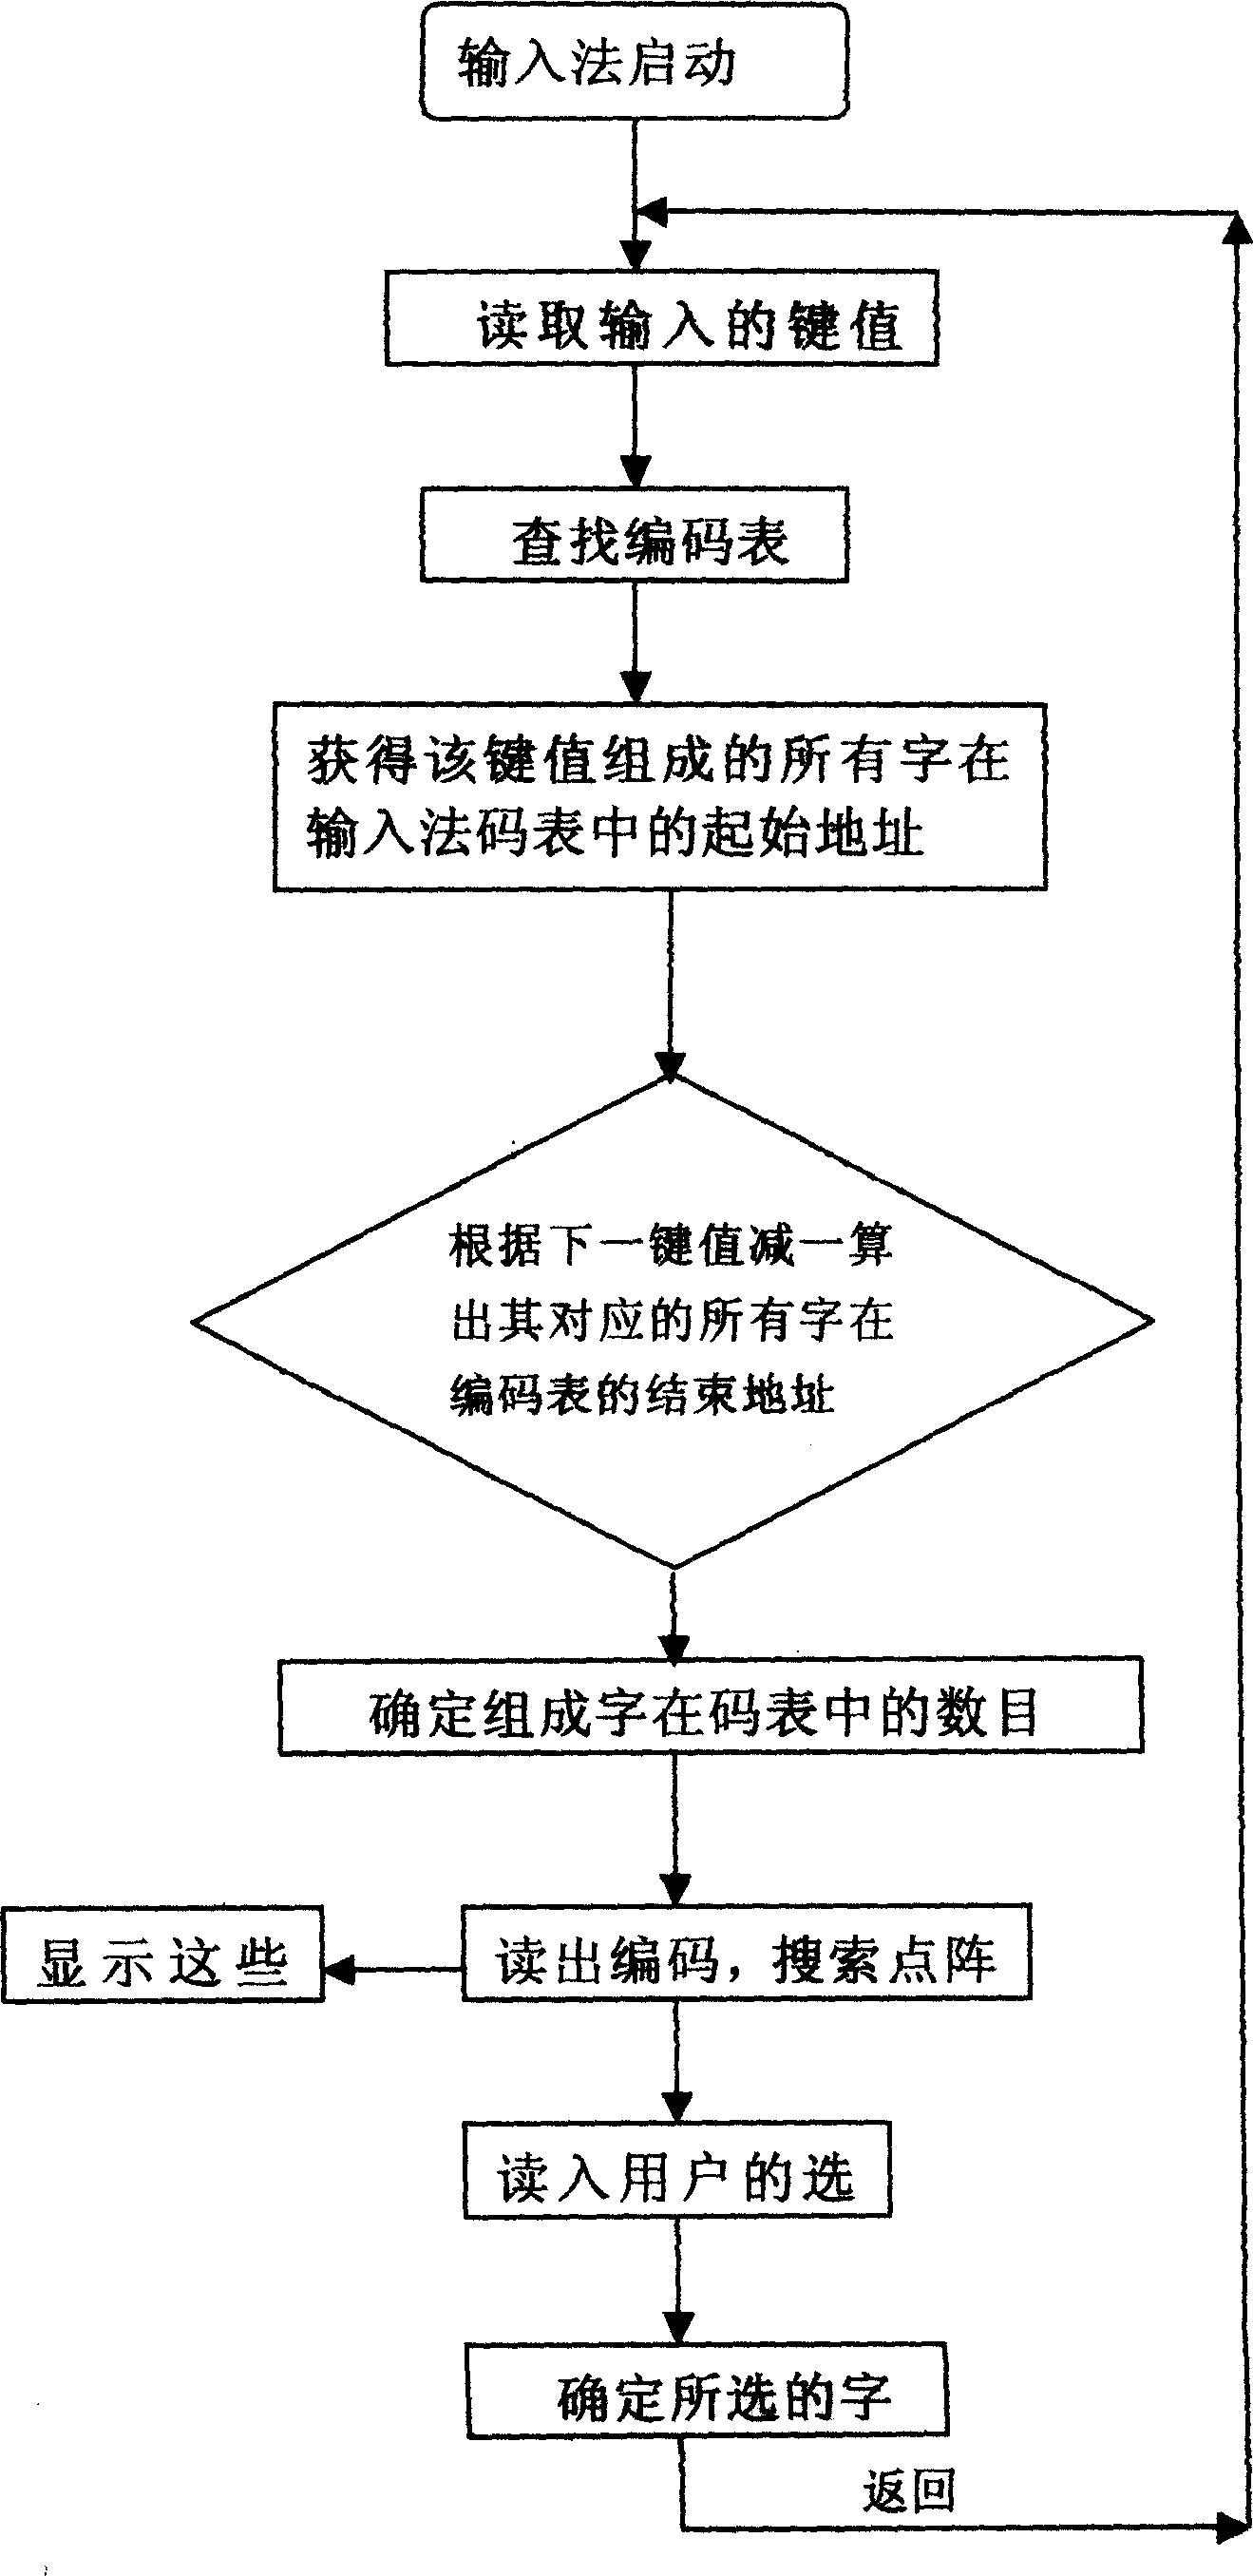 Method for realizing tibetan language input, display and short-message reception and transmission by hand-held electronic terminal